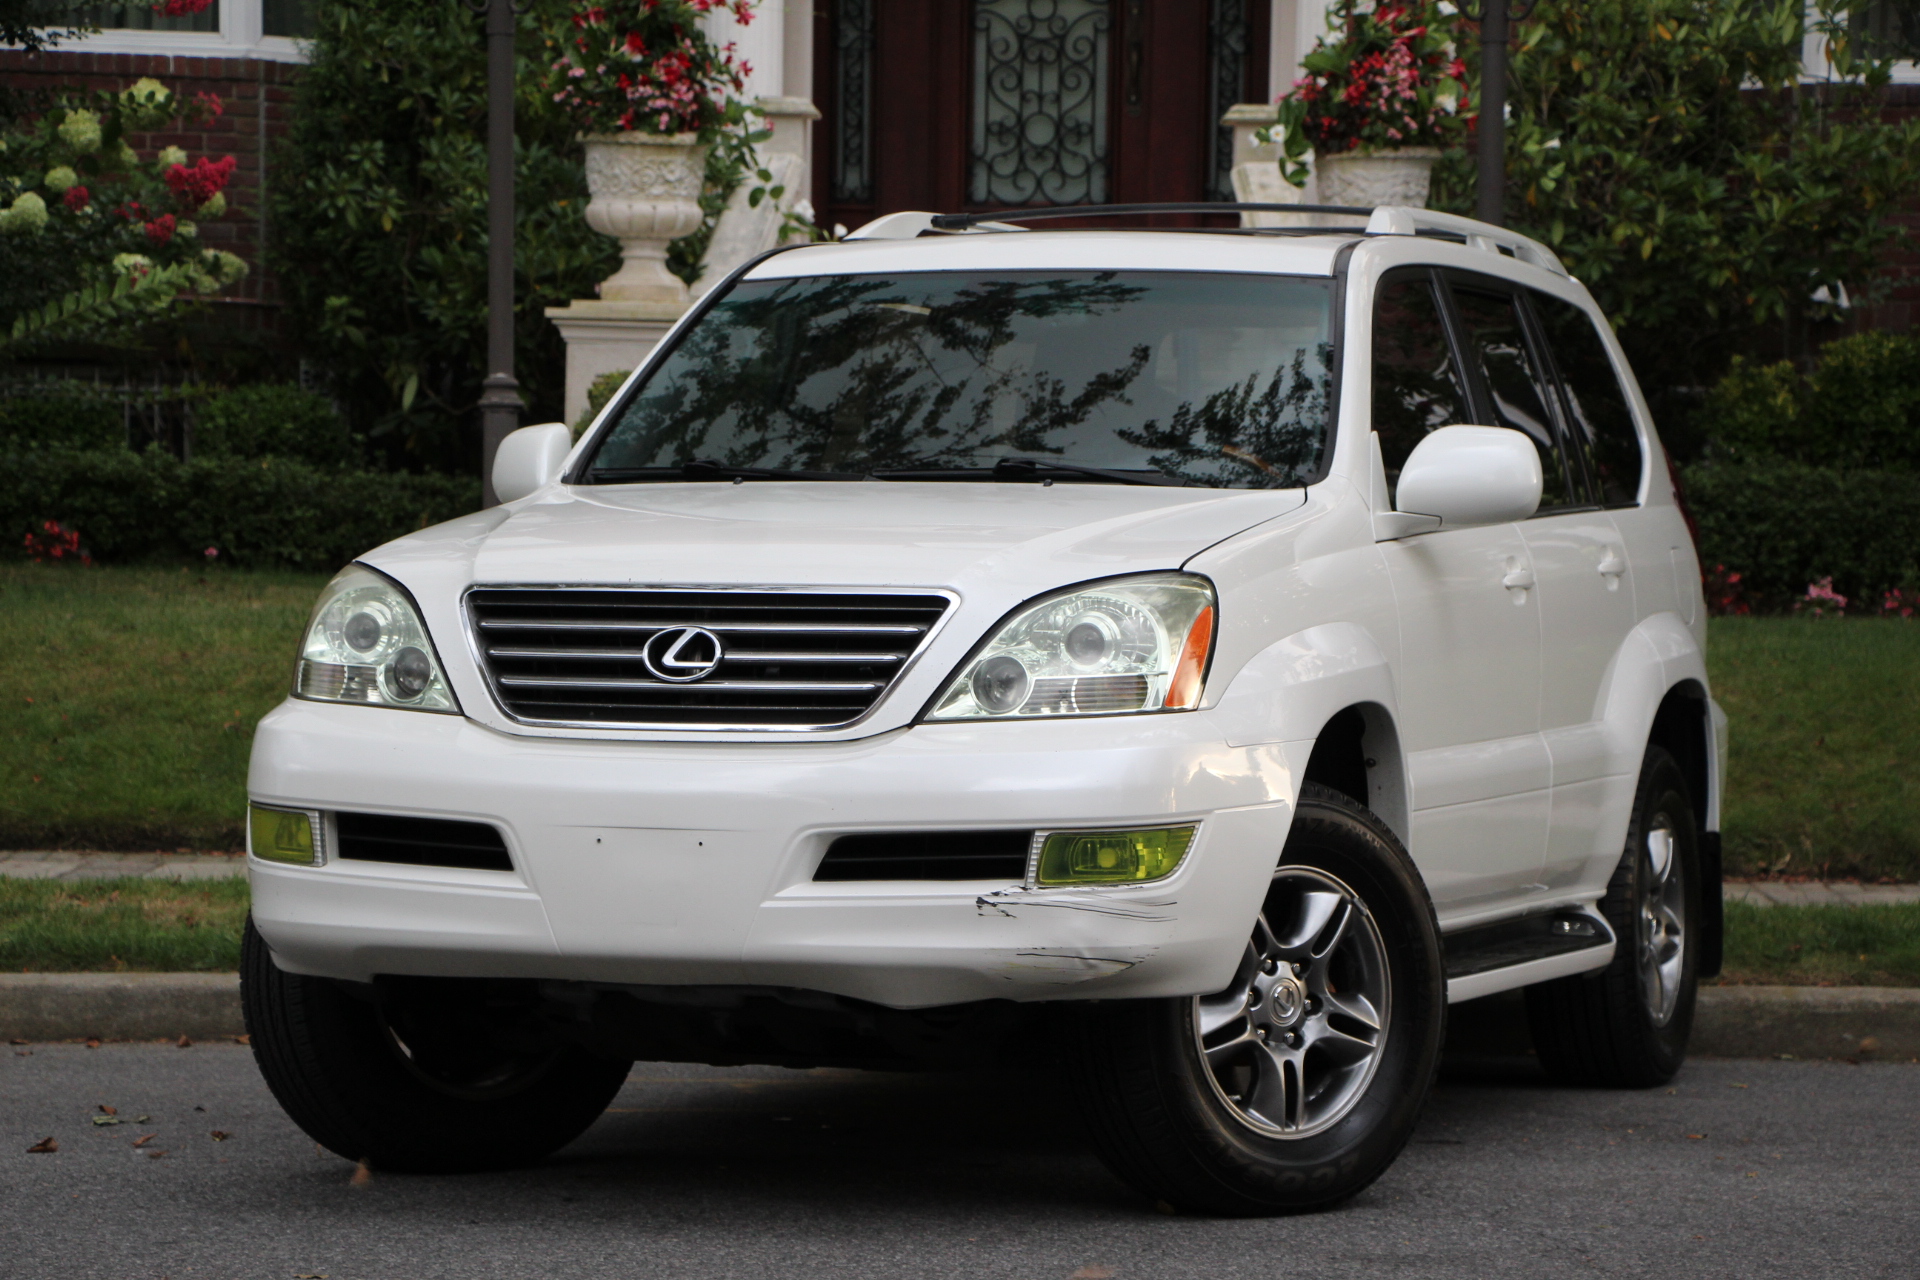 Buy Used 2004 LEXUS GX470 AWD for $9 900 from trusted dealer in Brooklyn,  NY!